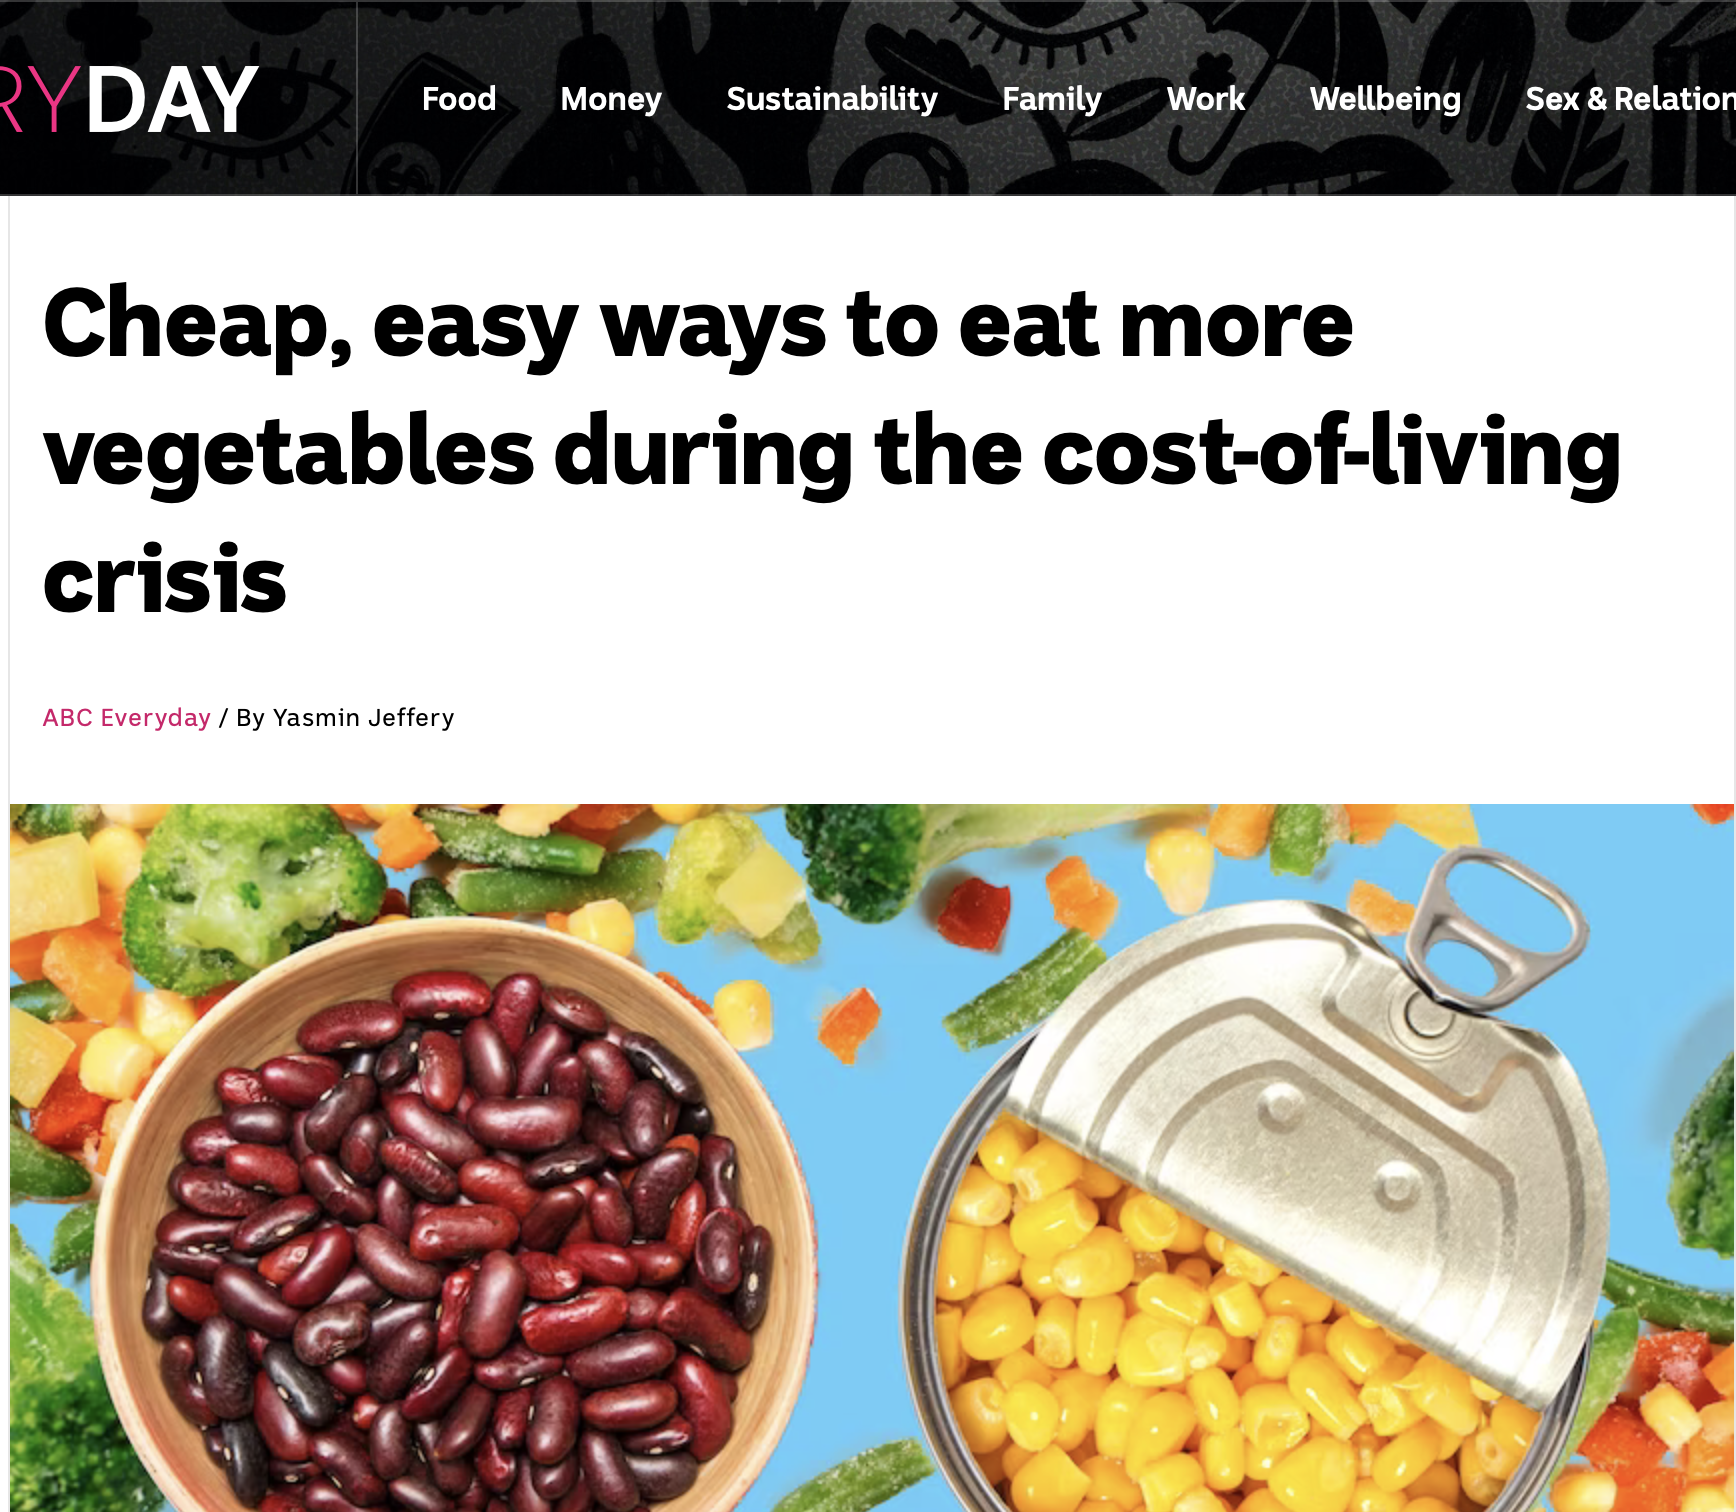 ABC Everyday: Cheap Easy Ways to Eat More Veggies During the Cost of Living Crisis